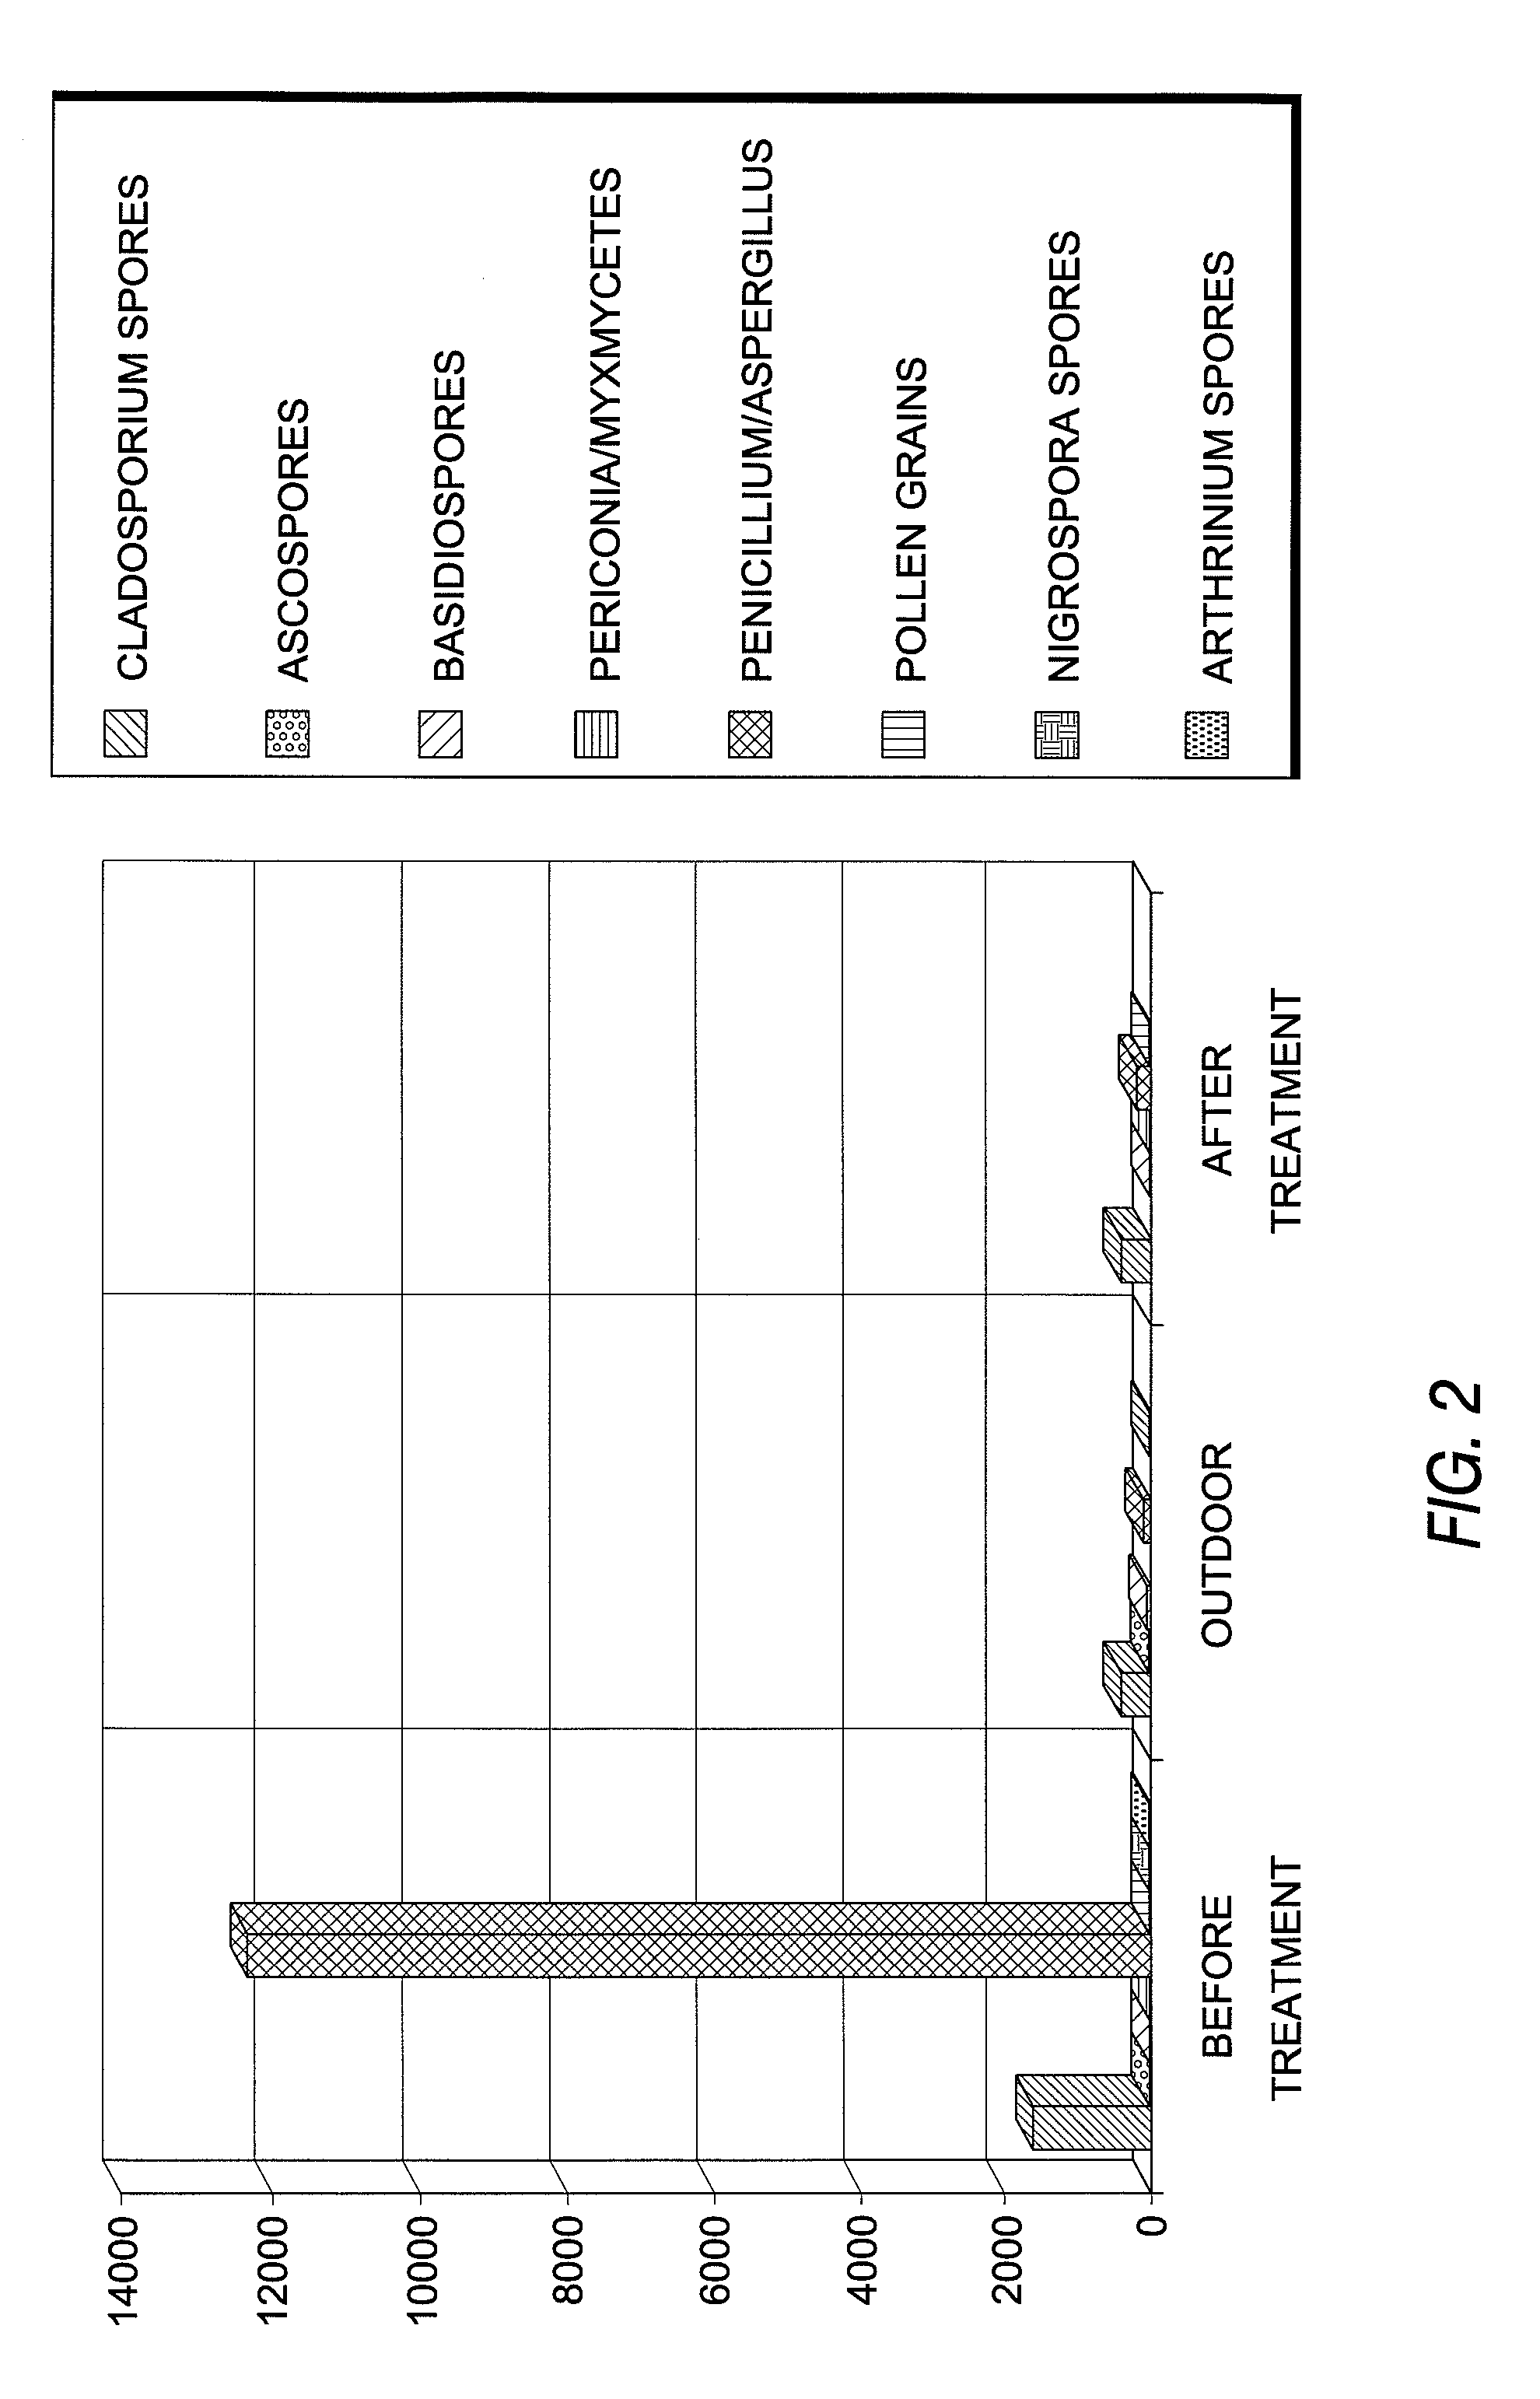 Method for abatement of allergens, pathogens and volatile organic compounds